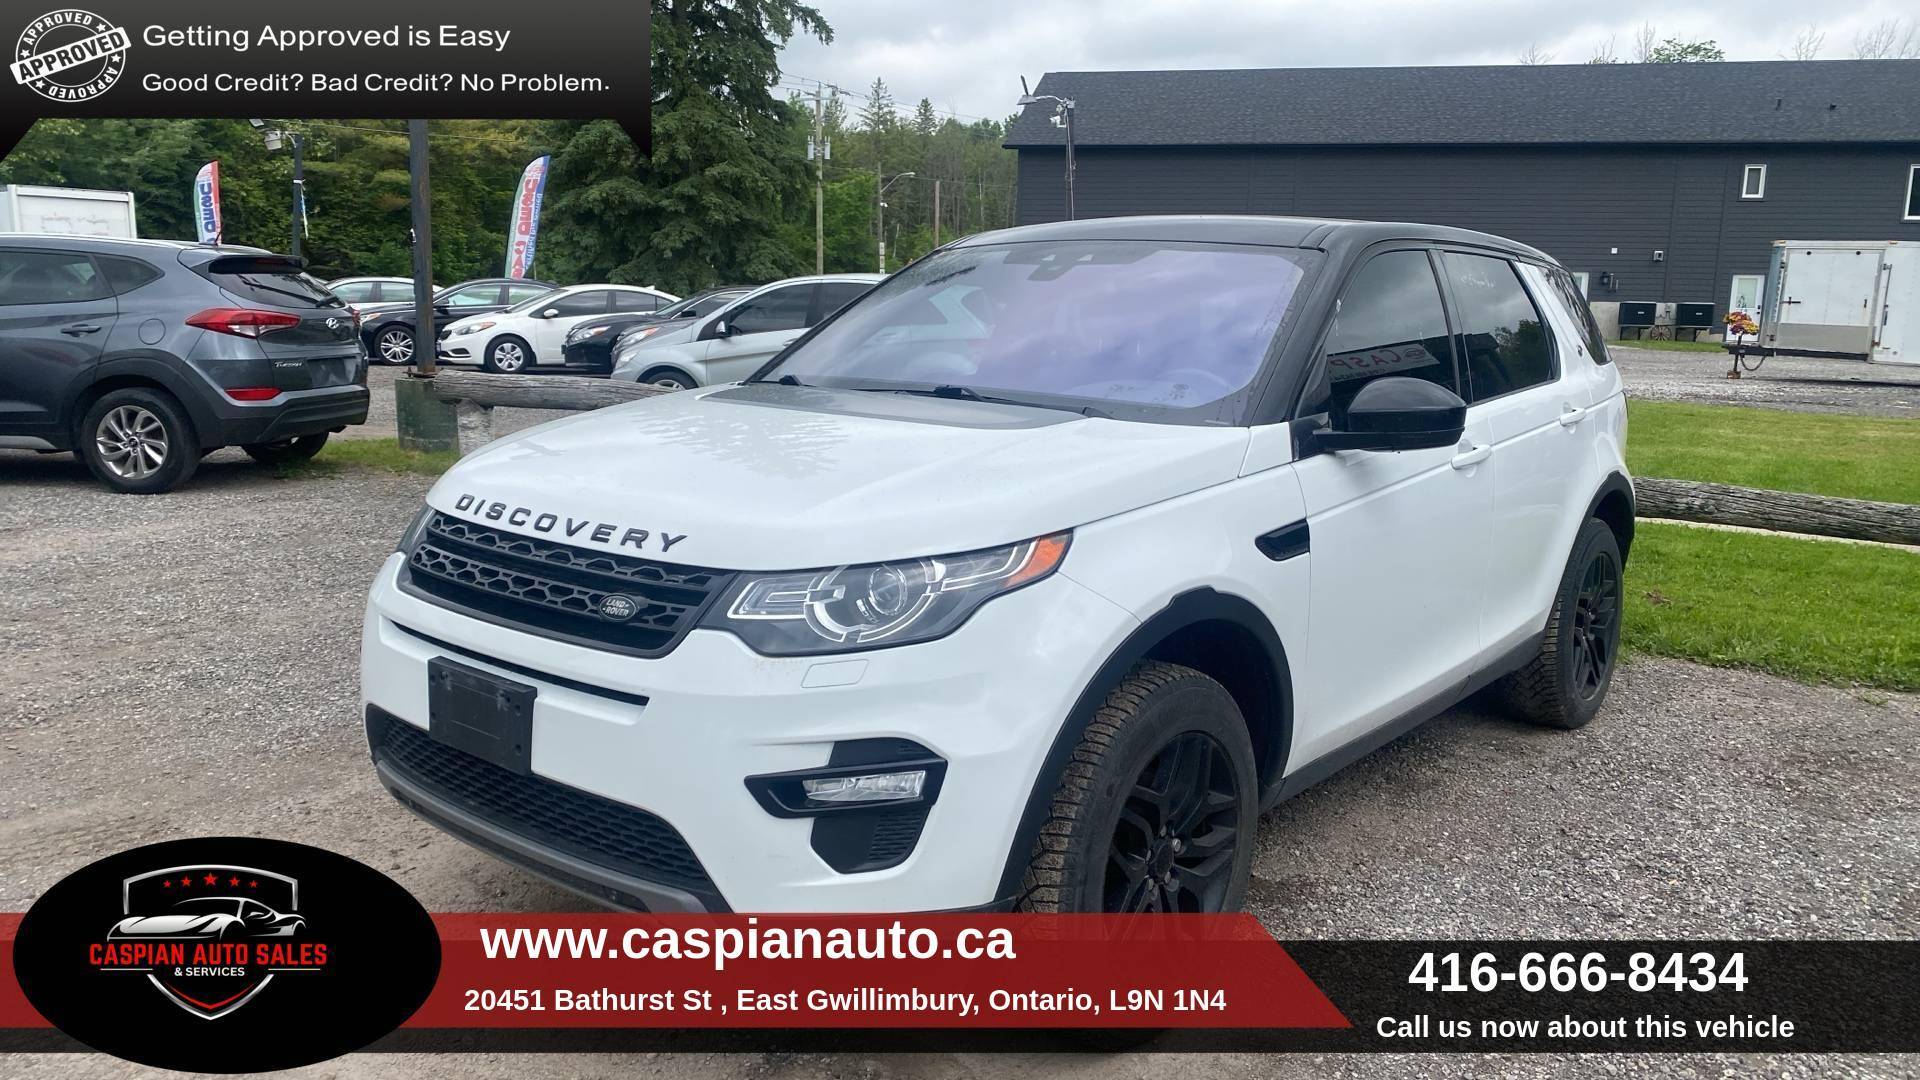 2018 Land Rover Discovery Sport HSE black addition pkg/ 4WD/Navi/Pana roof